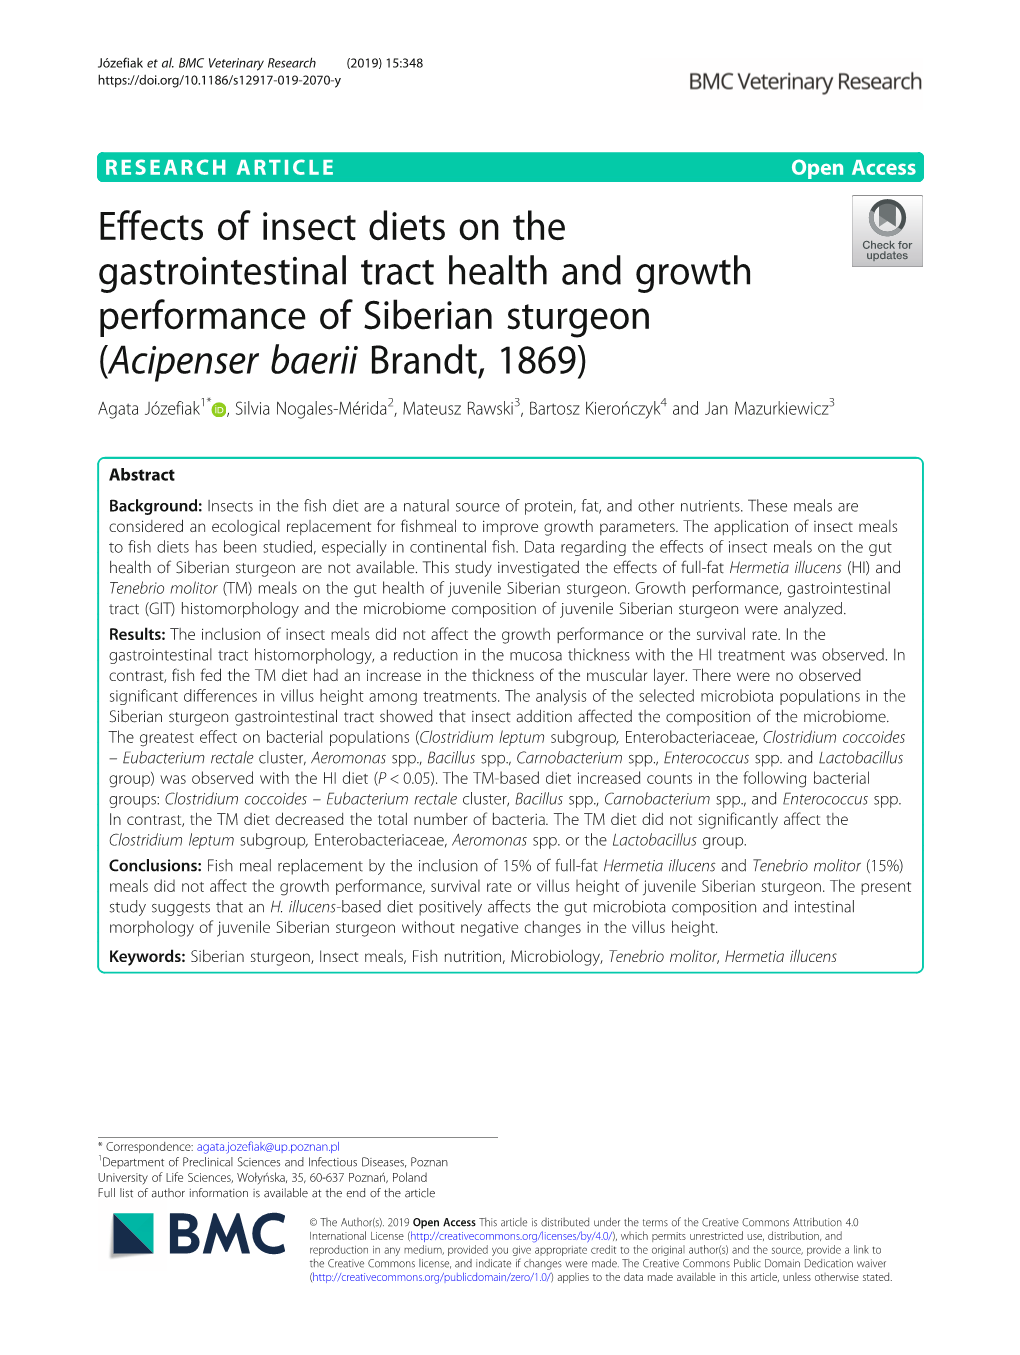 Effects of Insect Diets on the Gastrointestinal Tract Health And